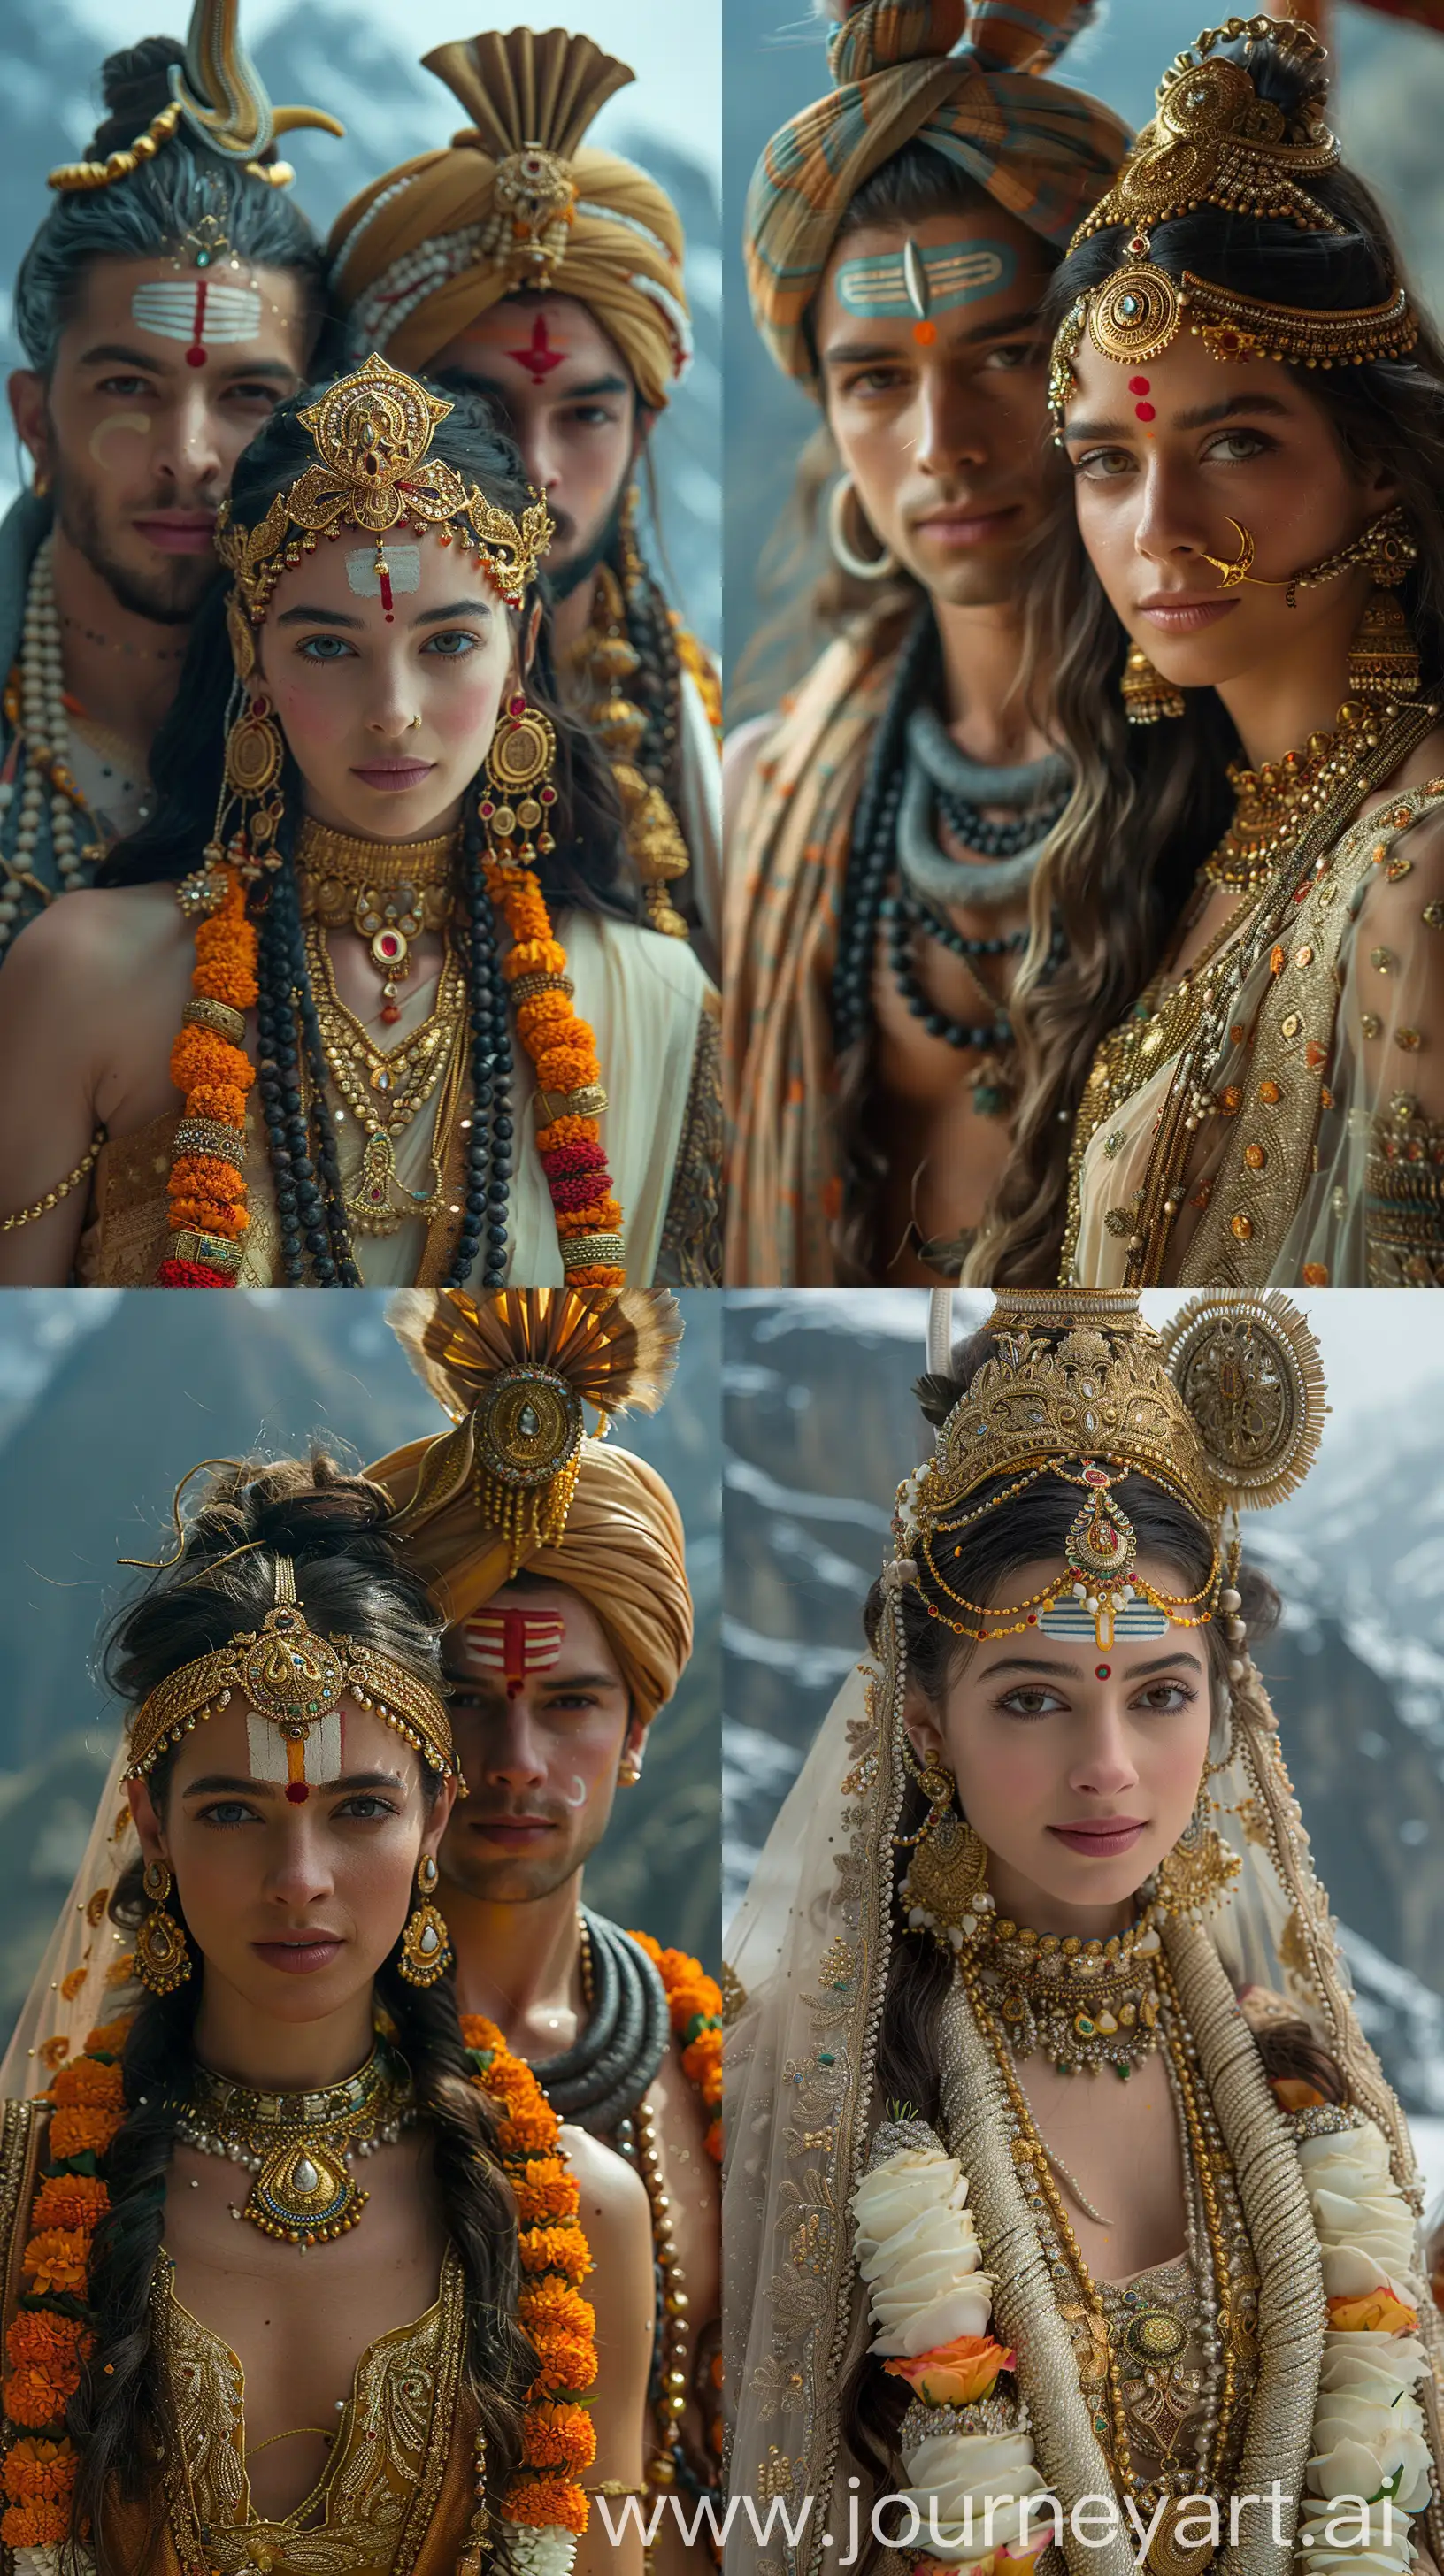 mj1 Divine spiritual marriage of Hindu deities Lord Shiva and Parvati celebrating Shivratri, grand cosmic event with celestial ambience, IMAX-worthy spectacle inspired by Christopher Nolan's signature epic scale, adorned with traditional gold ornaments, intricate headdresses, amidst Himalayas --ar 9:16 --s 700 --v 6